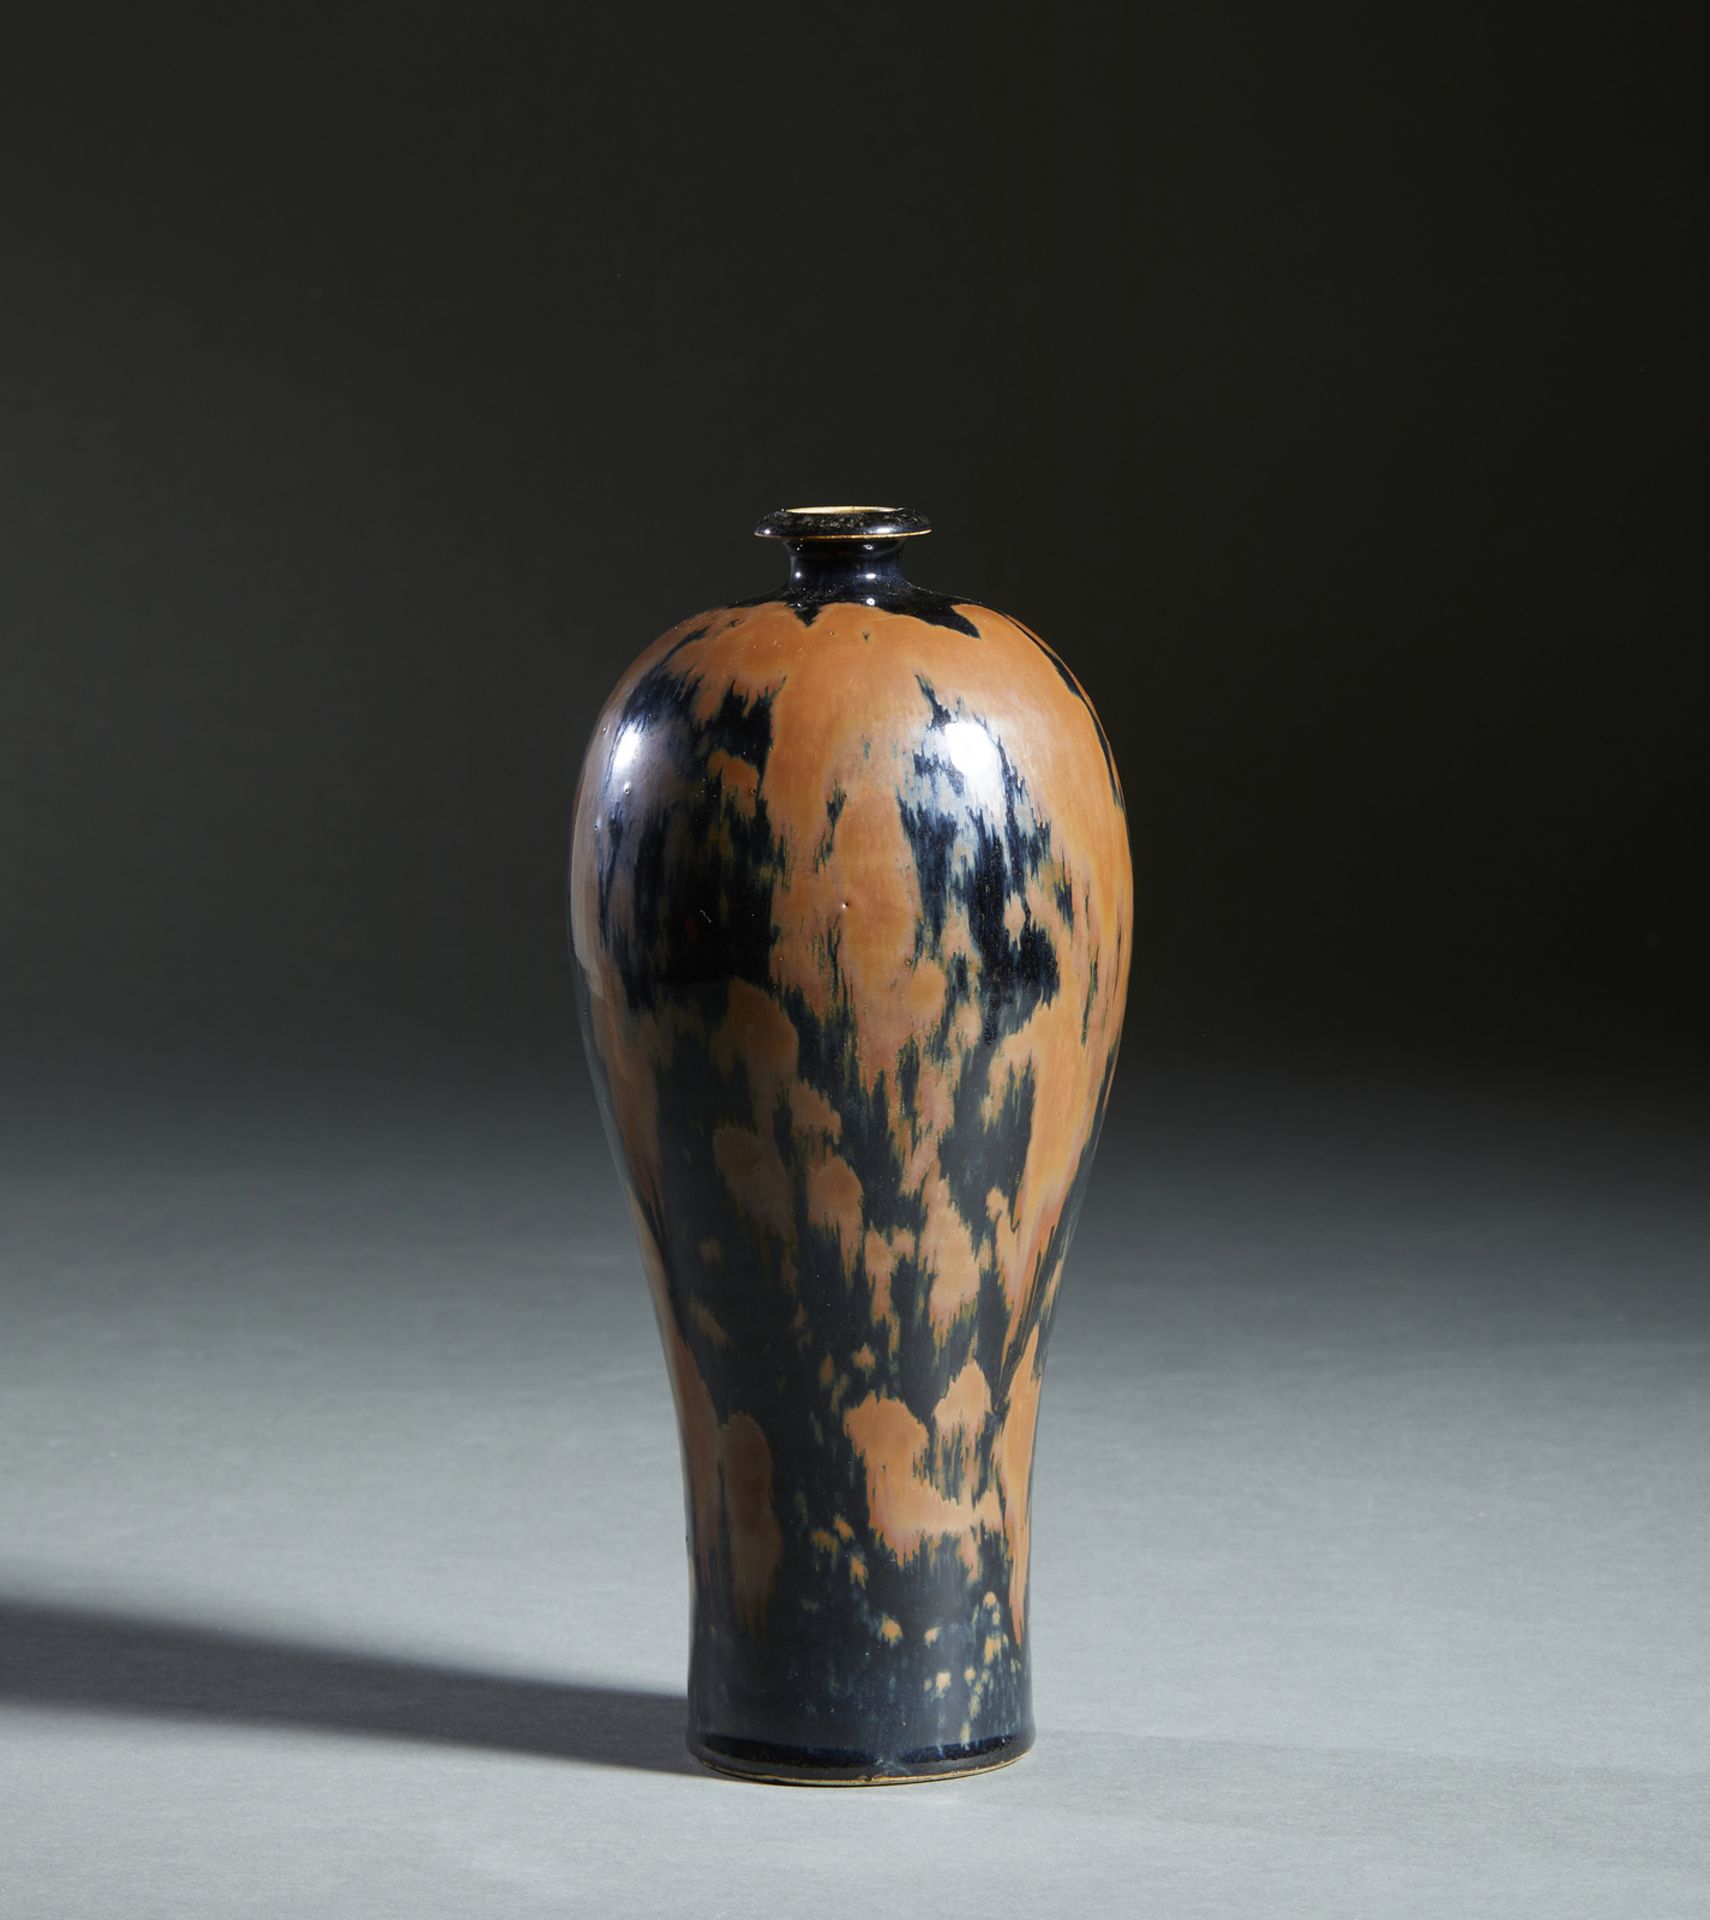 Meiping pottery vase in the Jian Song style China, 19th century with its characteristic inverted